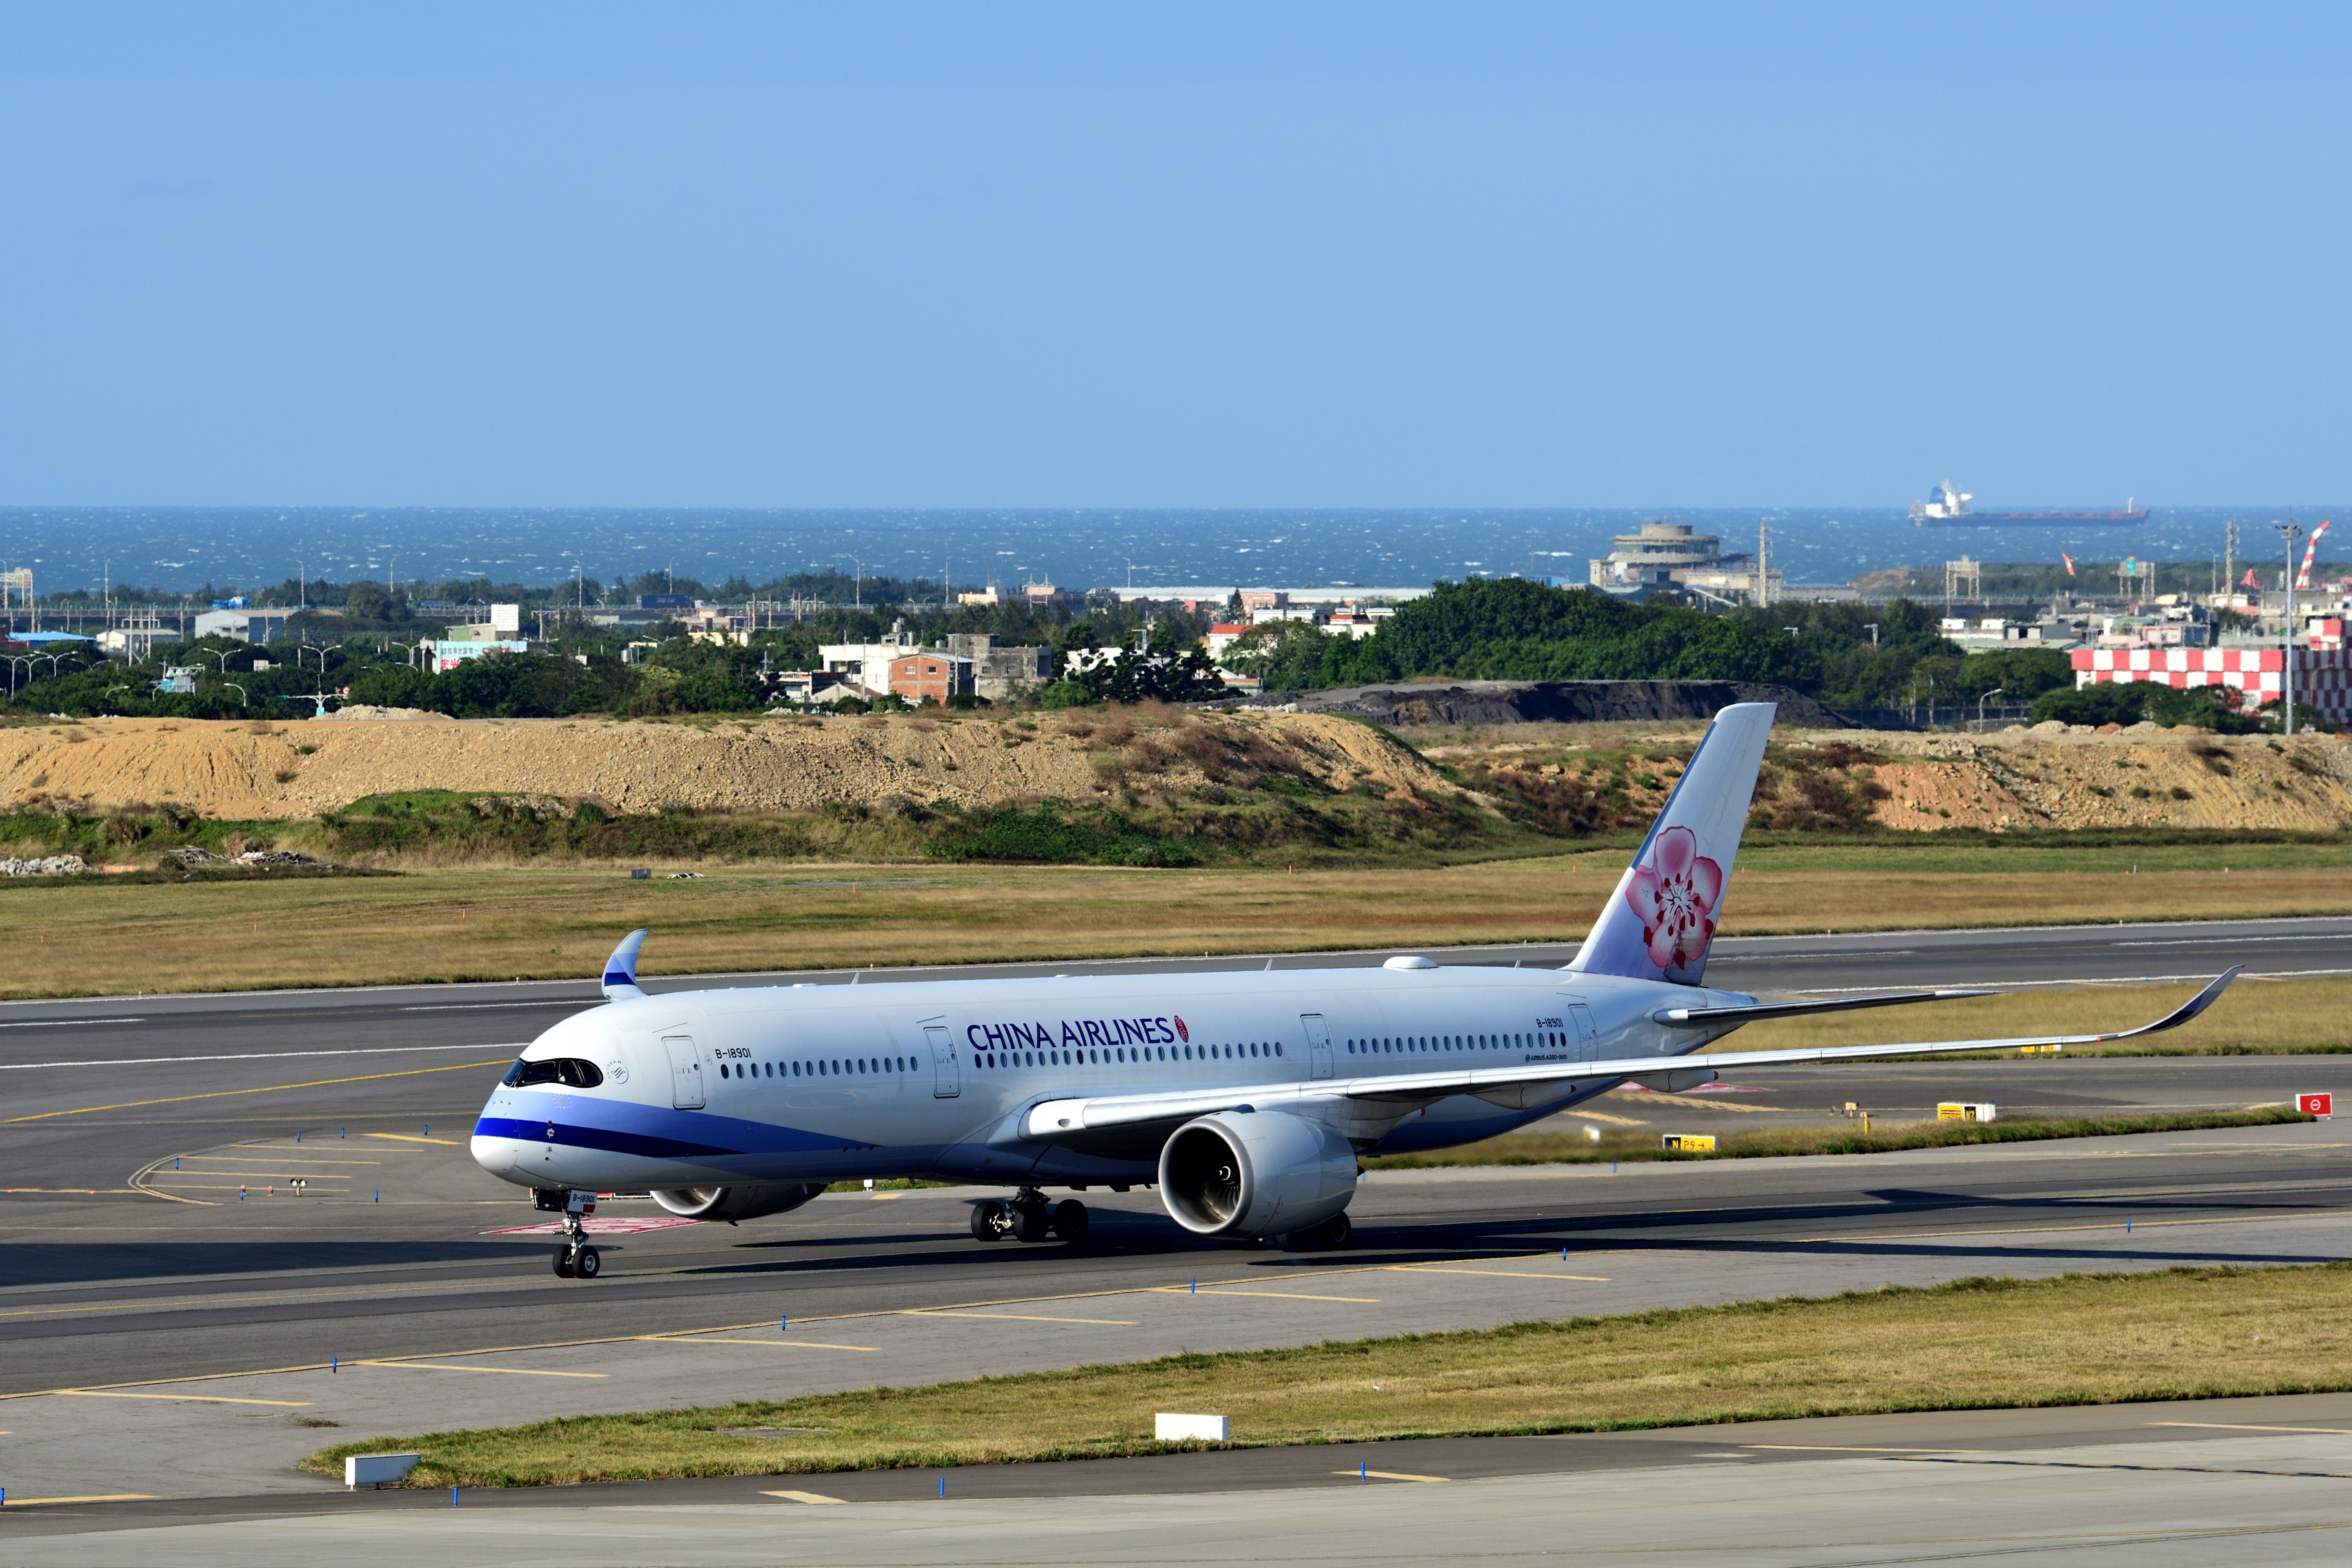 China Airlines Airbus A350